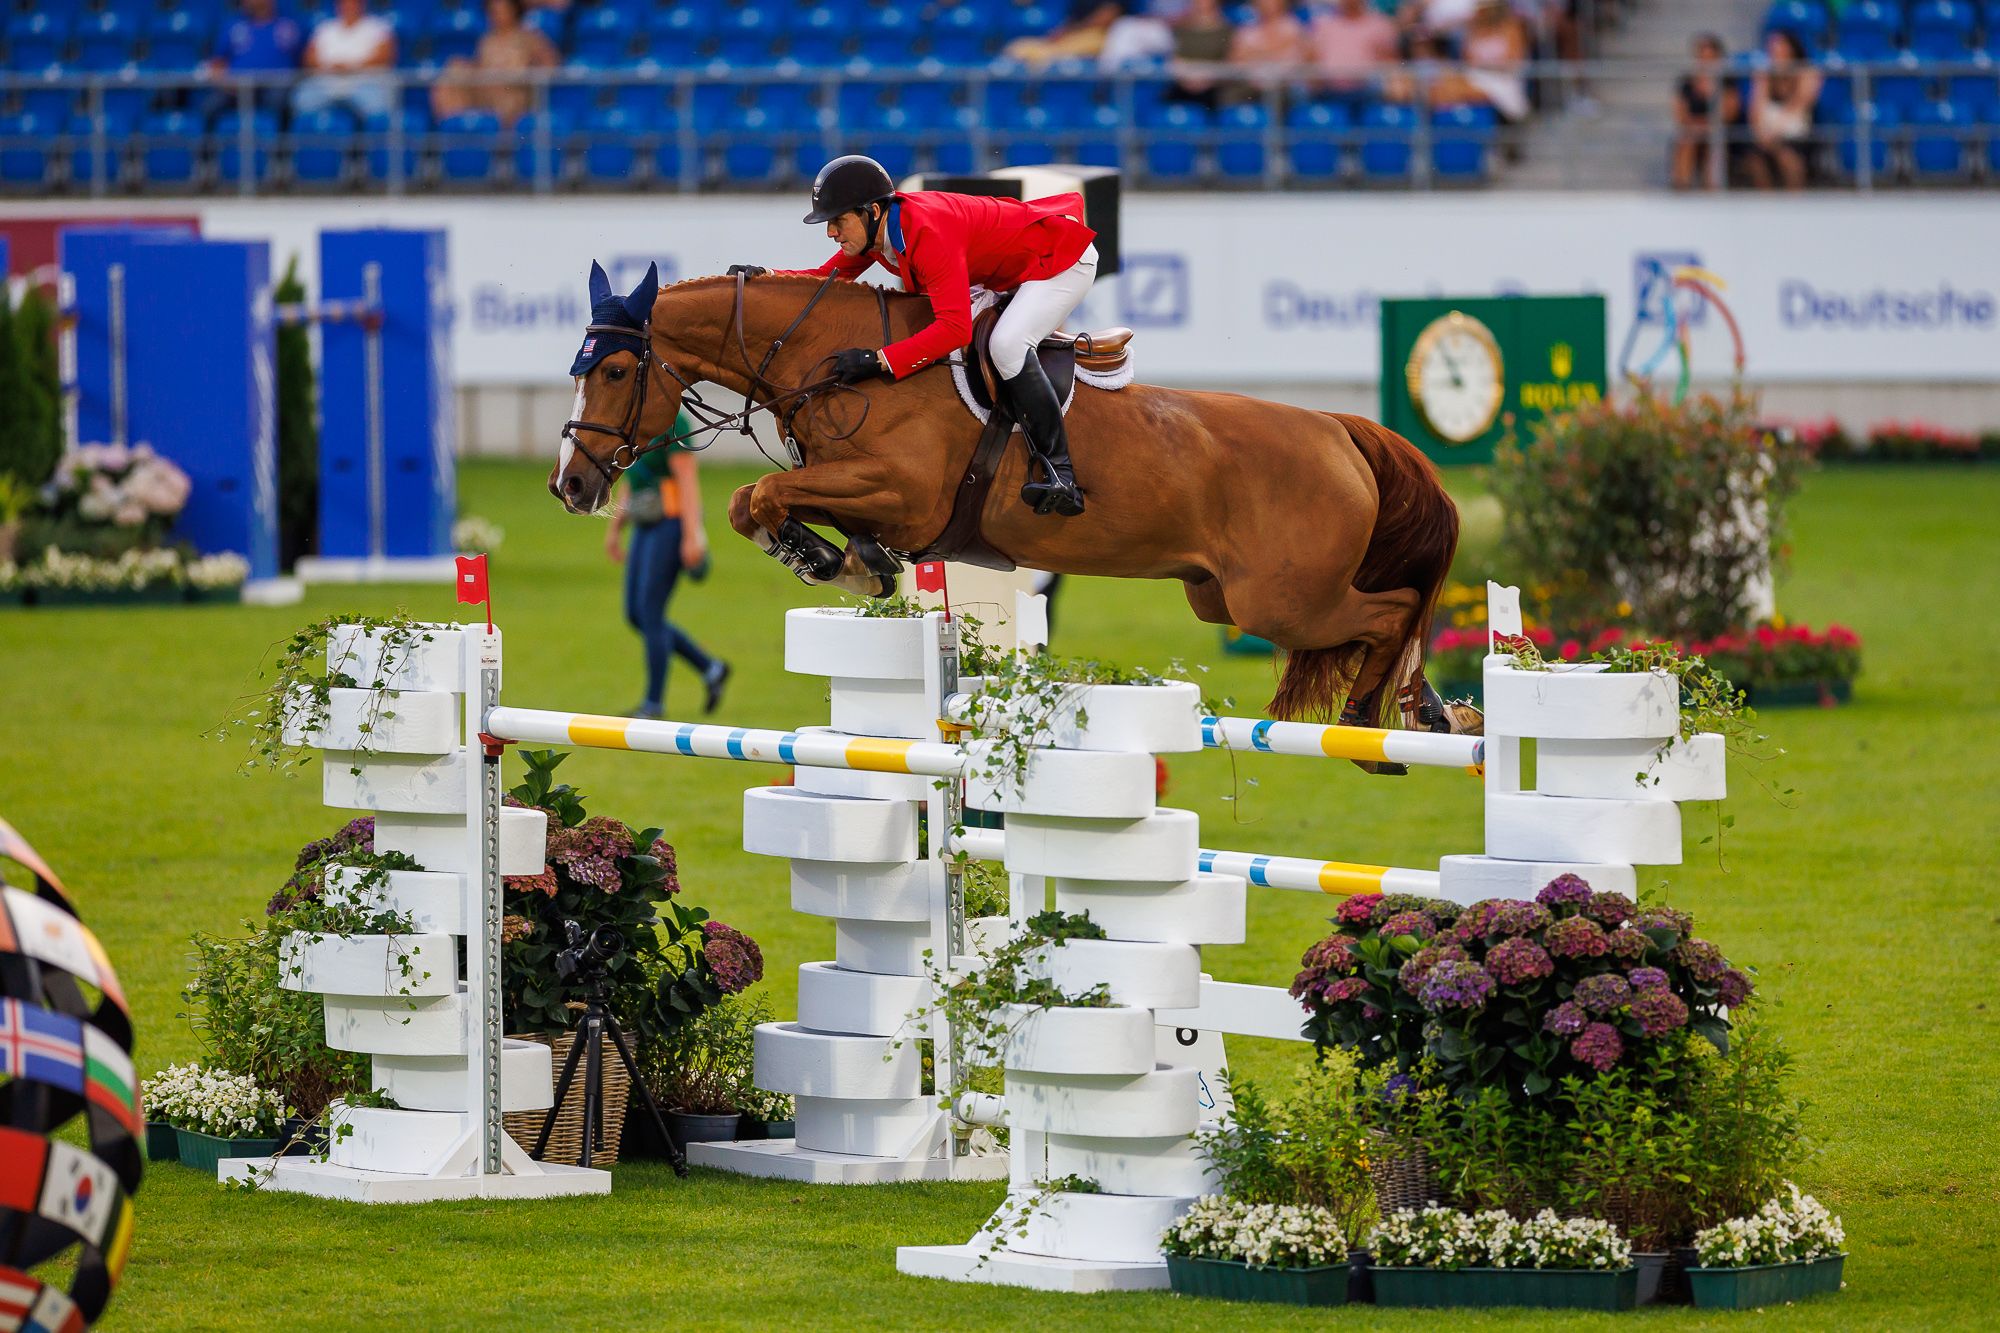 McLain Ward: "Aachen is the girl I dream of, but never get..."